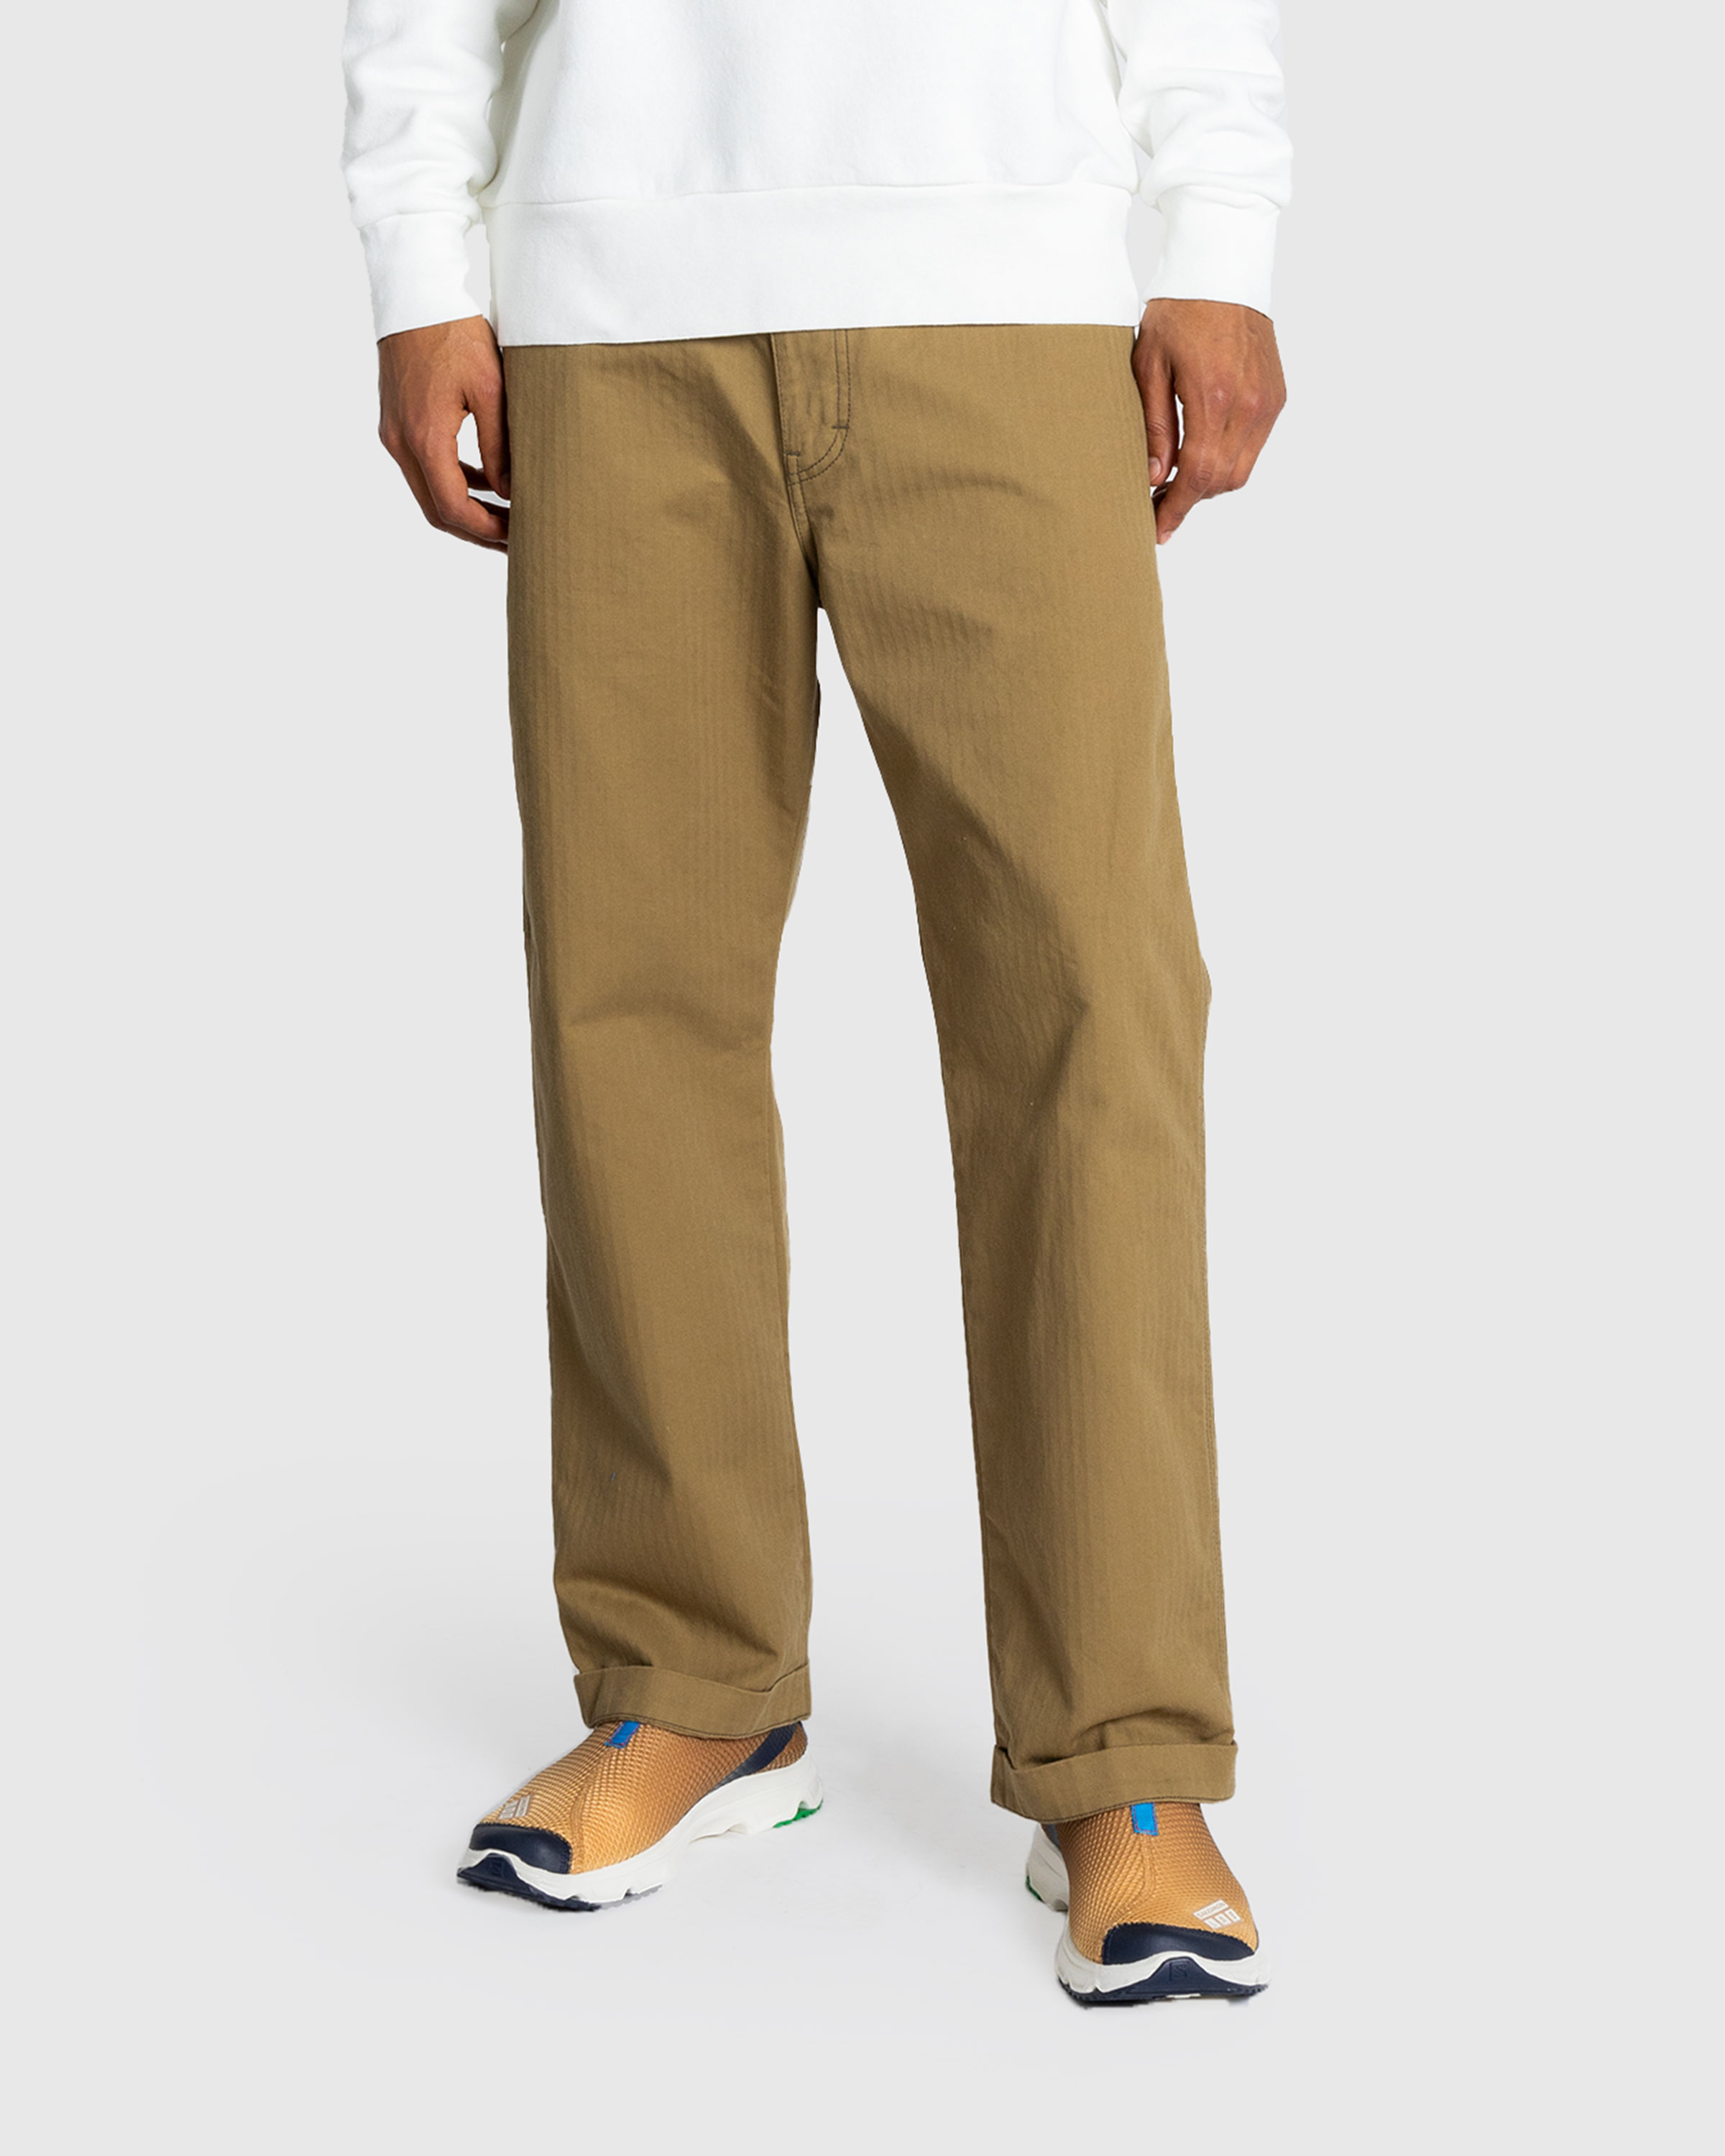 Human Made – Crazy Painter Pants Beige - Trousers - Beige - Image 2